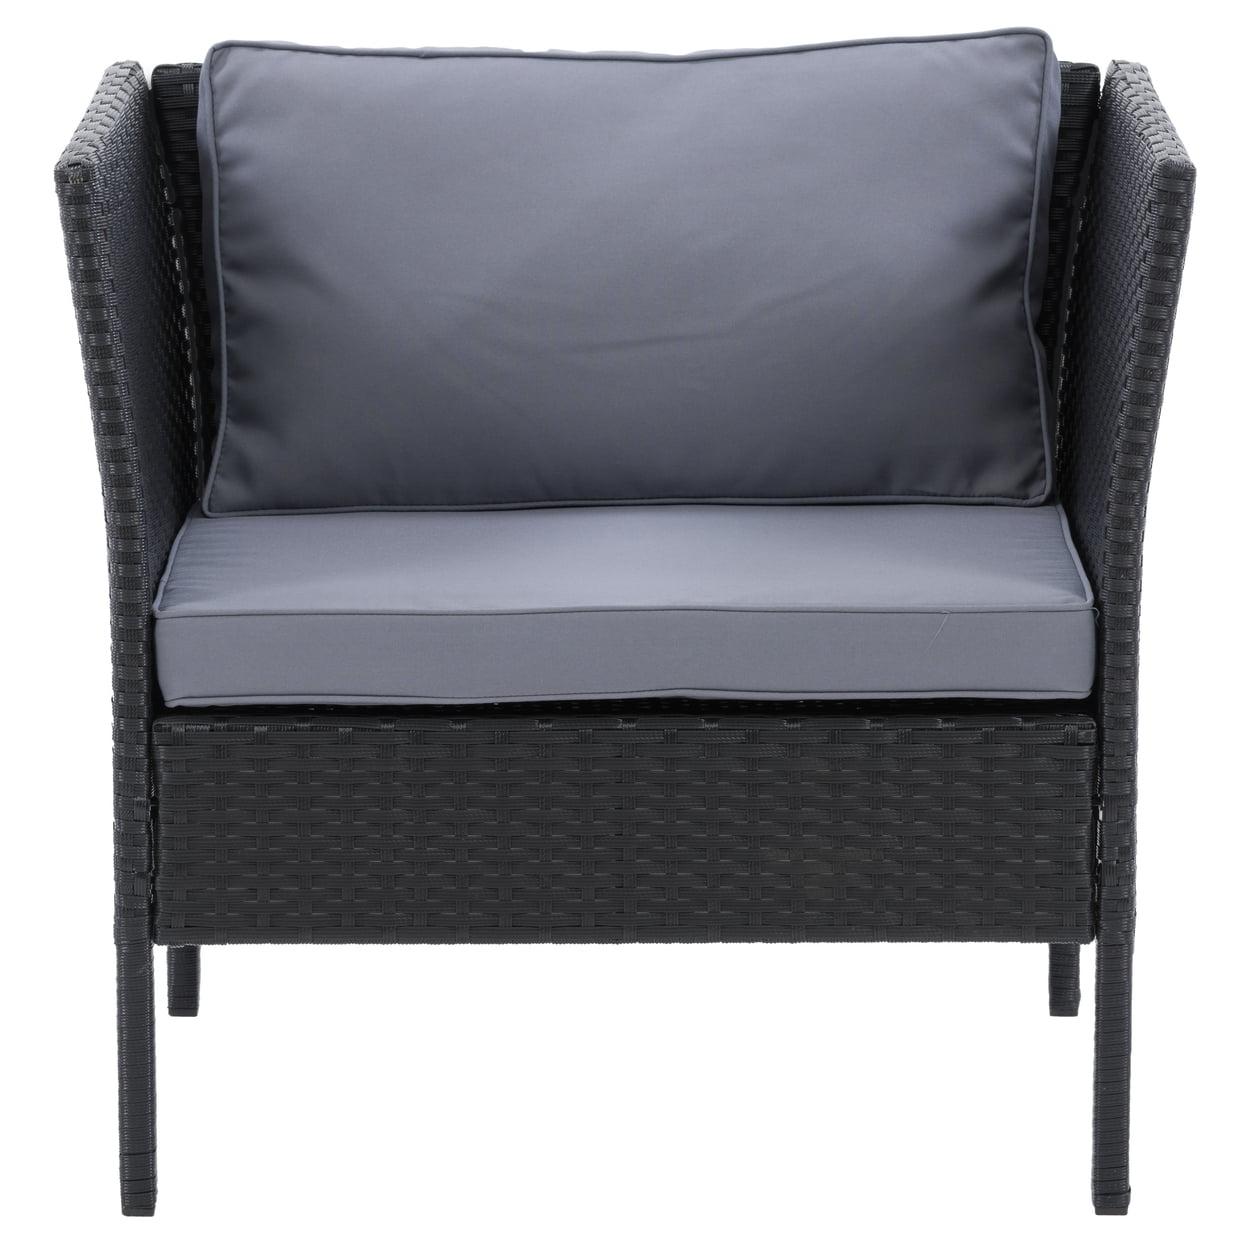 Elegant Black and Ash Gray Resin Wicker Patio Armchair with Cushions